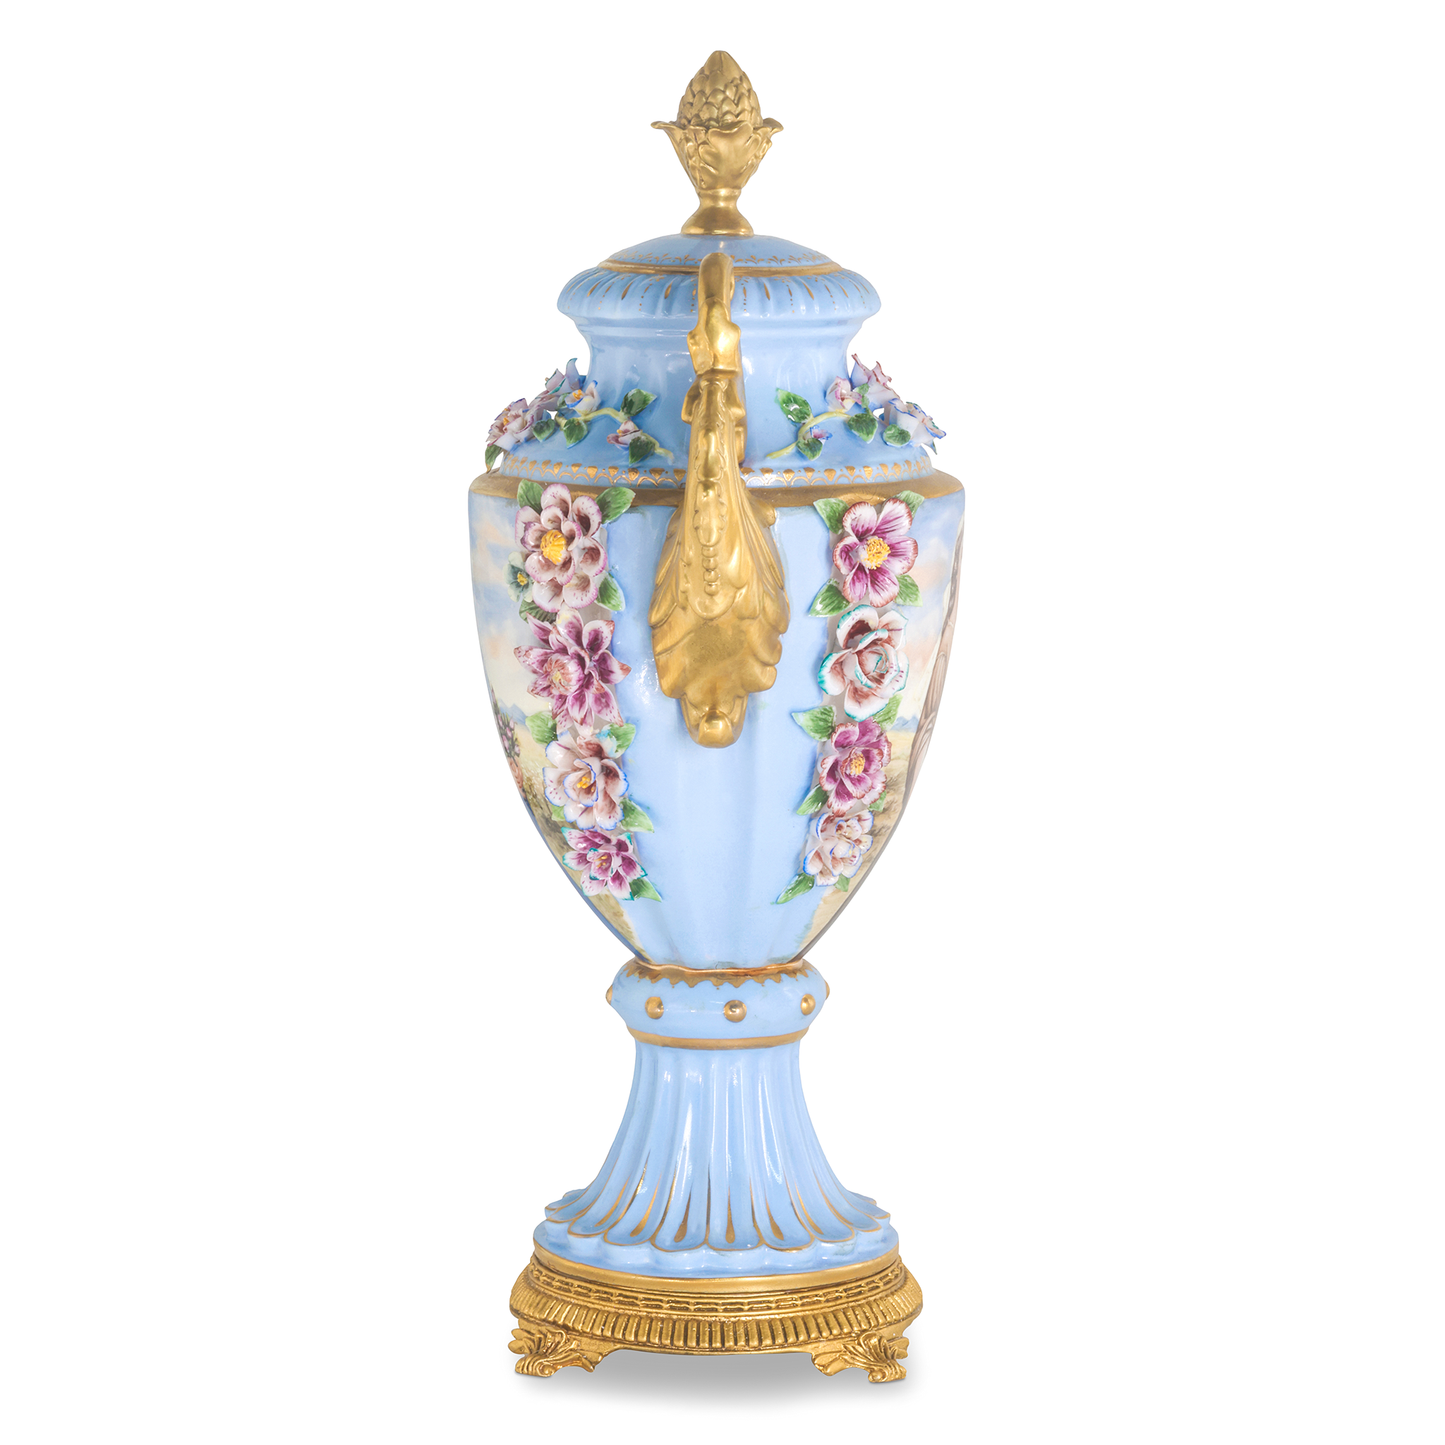 Baroque Hand-painted Motif Covered Jar